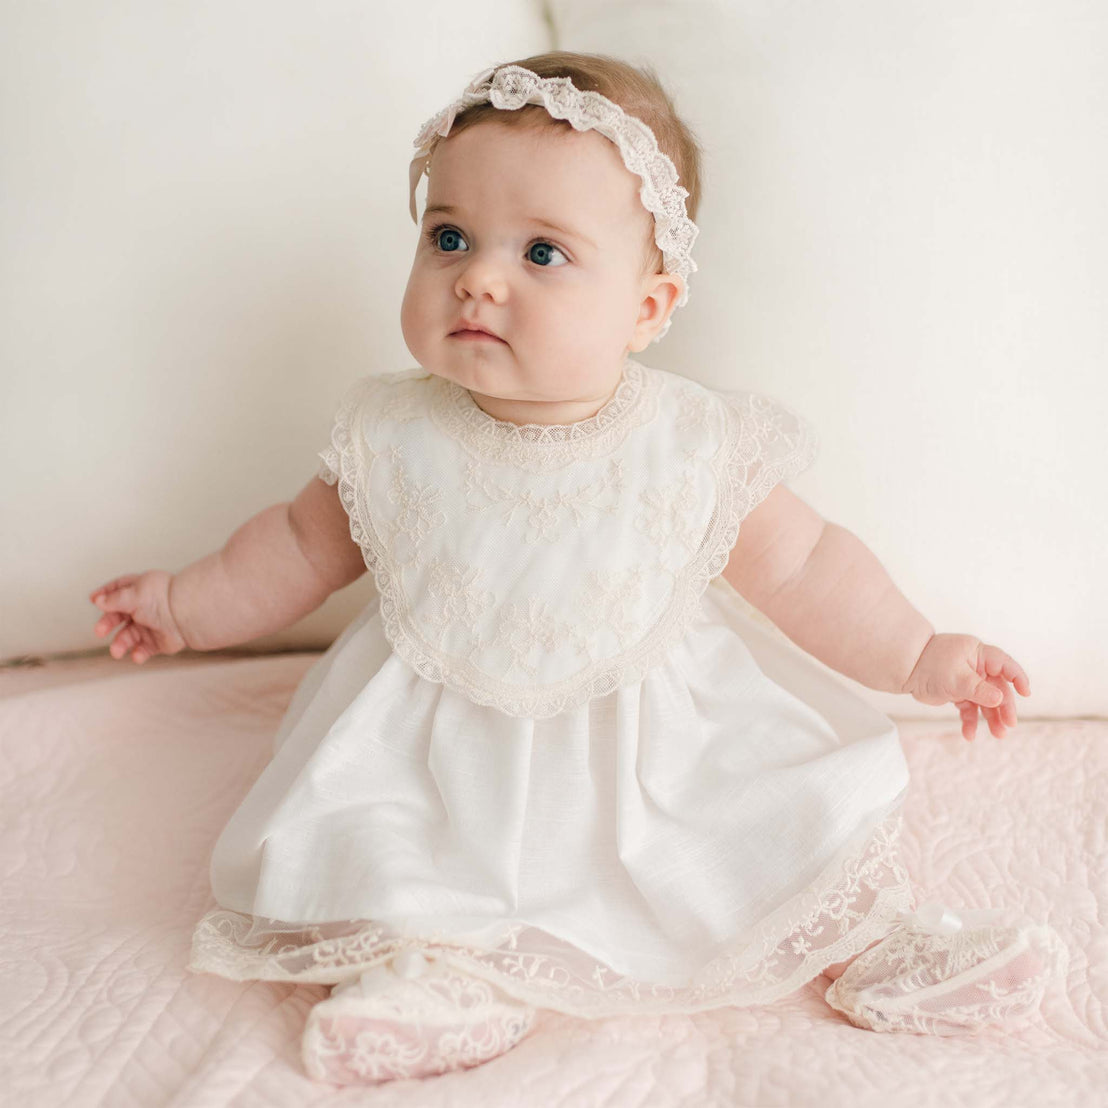 A baby with blue eyes and chubby cheeks is seated on a light pink quilt. The baby is wearing a white lace dress, a Jessica Cotton Bib, and a champagne lace headband. The background is soft and light-colored with white pillows.